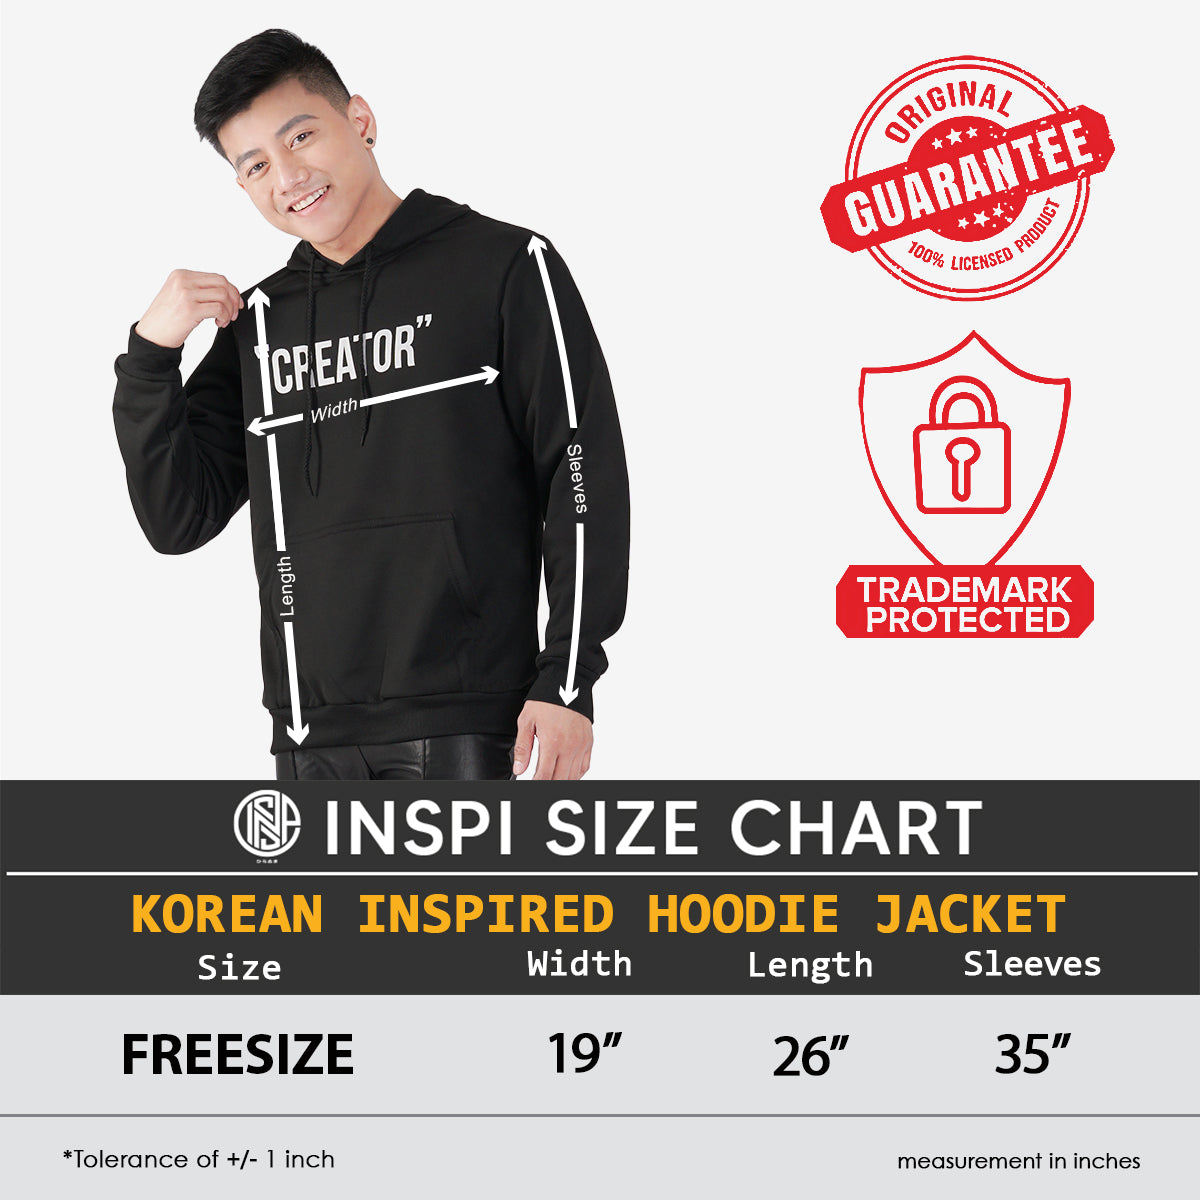 INSPI x Vrix Hoodie Jacket For Men w/ Pockets Minimalist Graphic Print Pullover For Women Printed Hoodies Collection